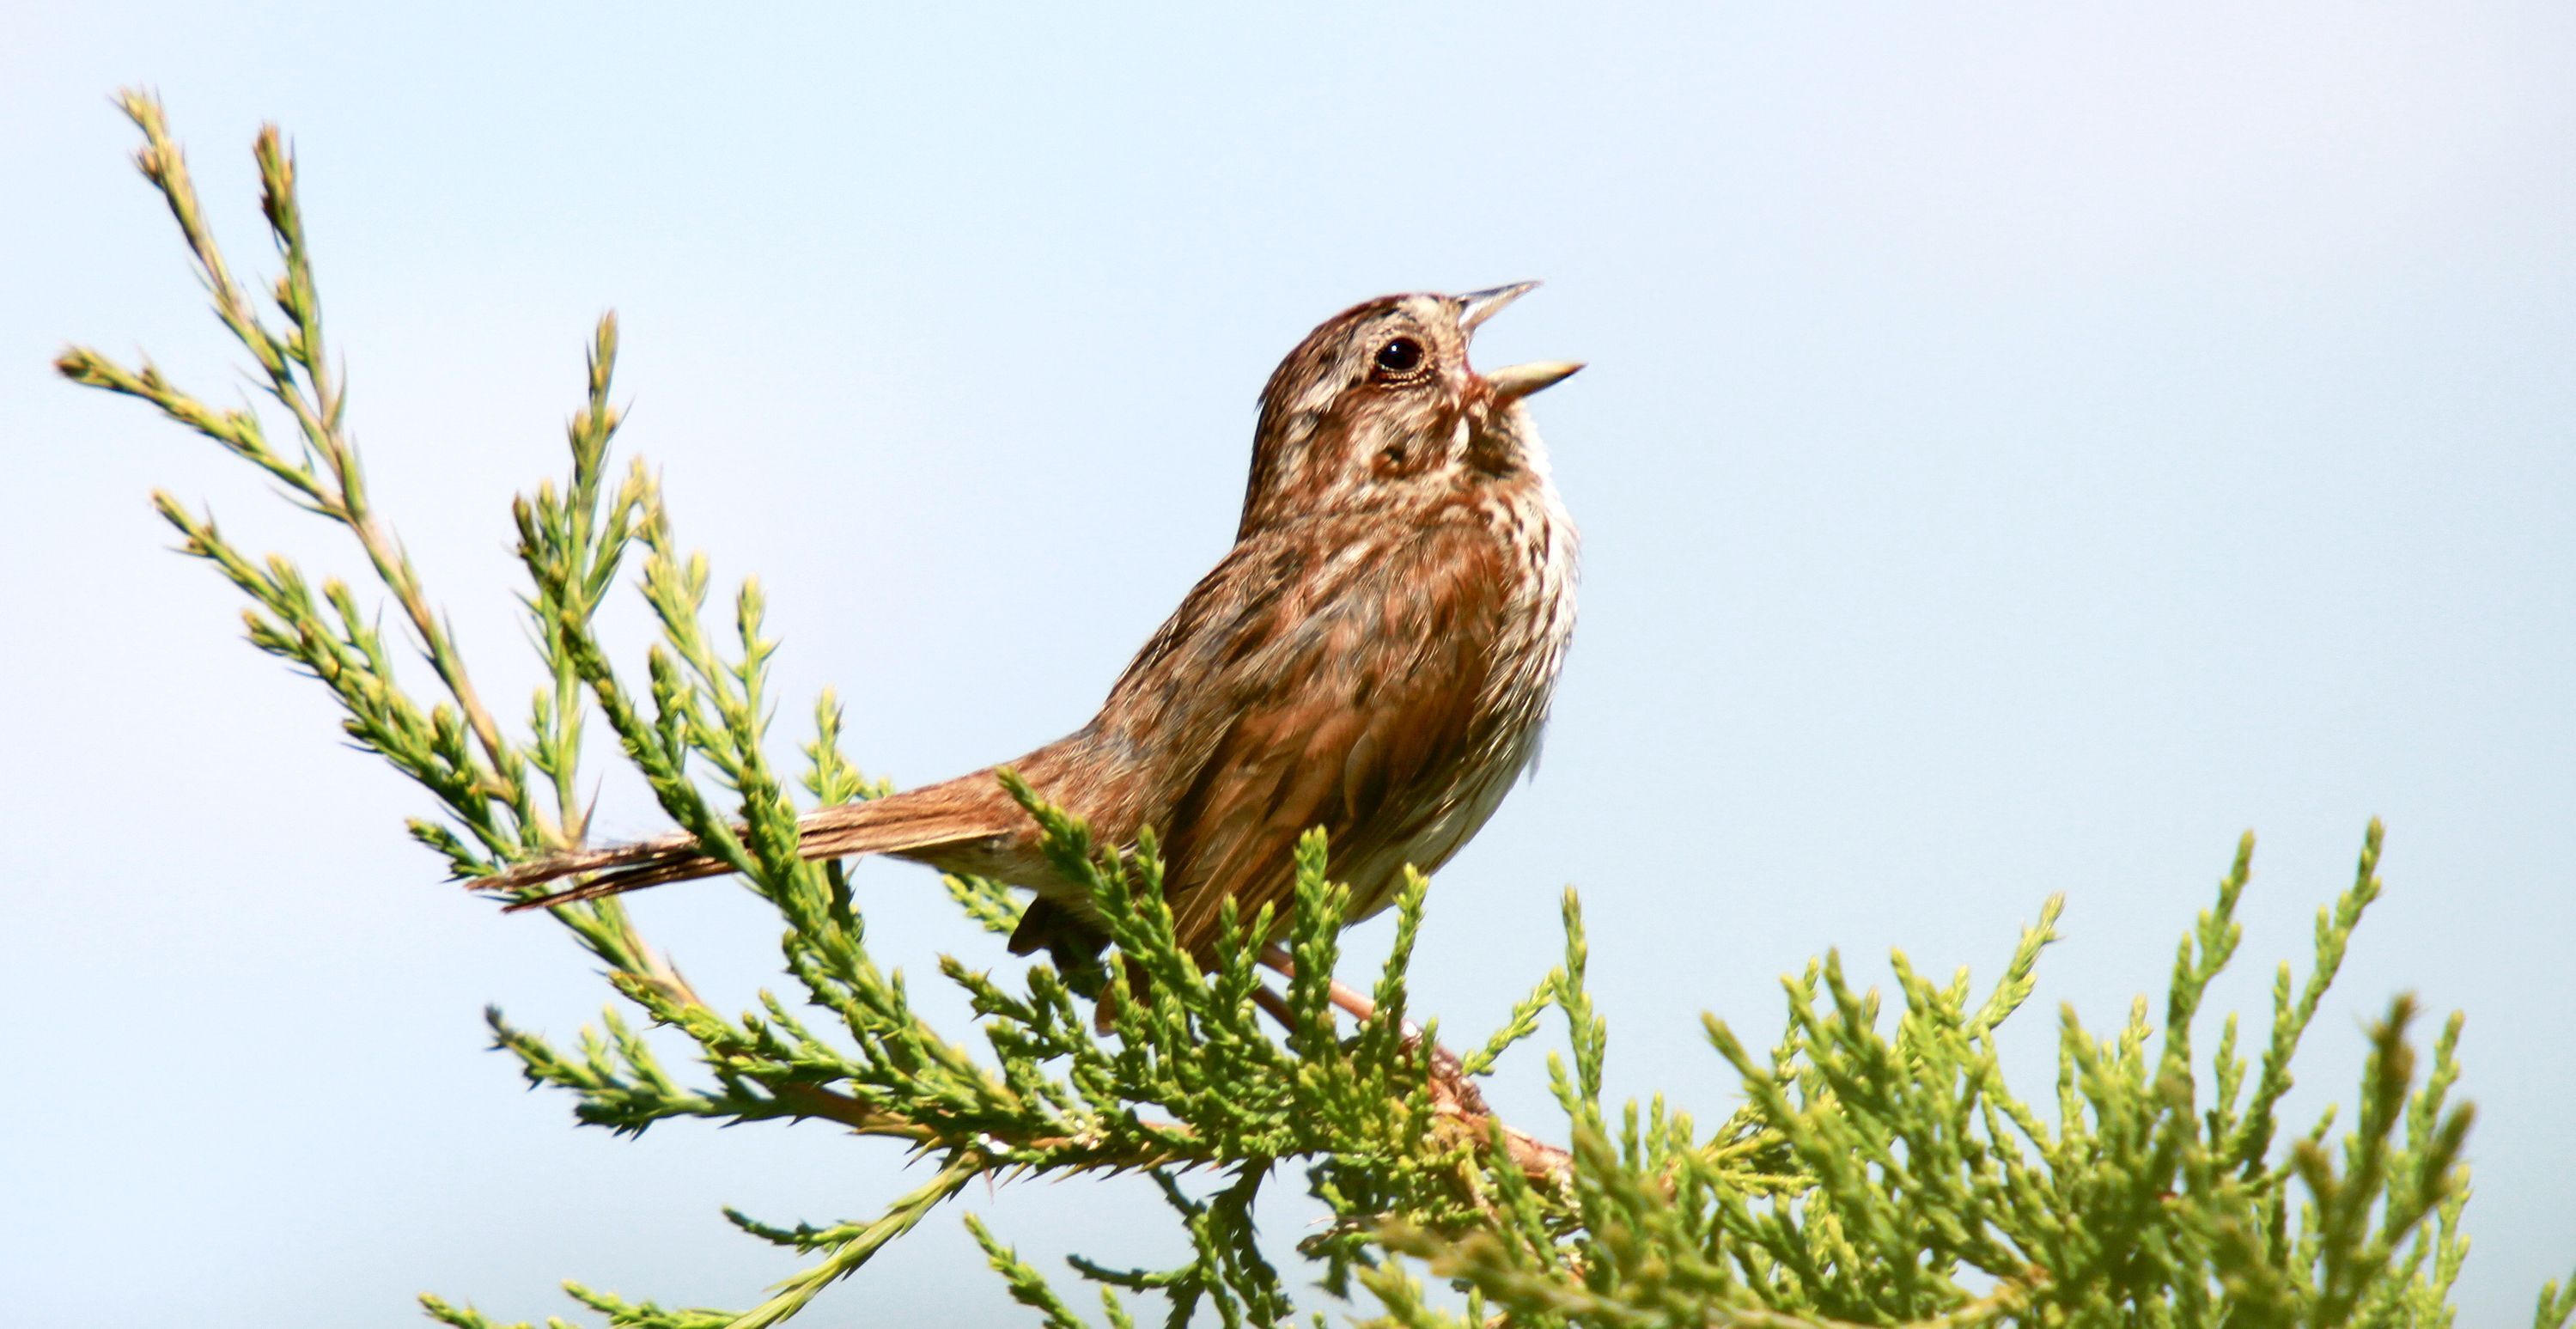 Grab Your Field Guide…Sparrows are Coming!